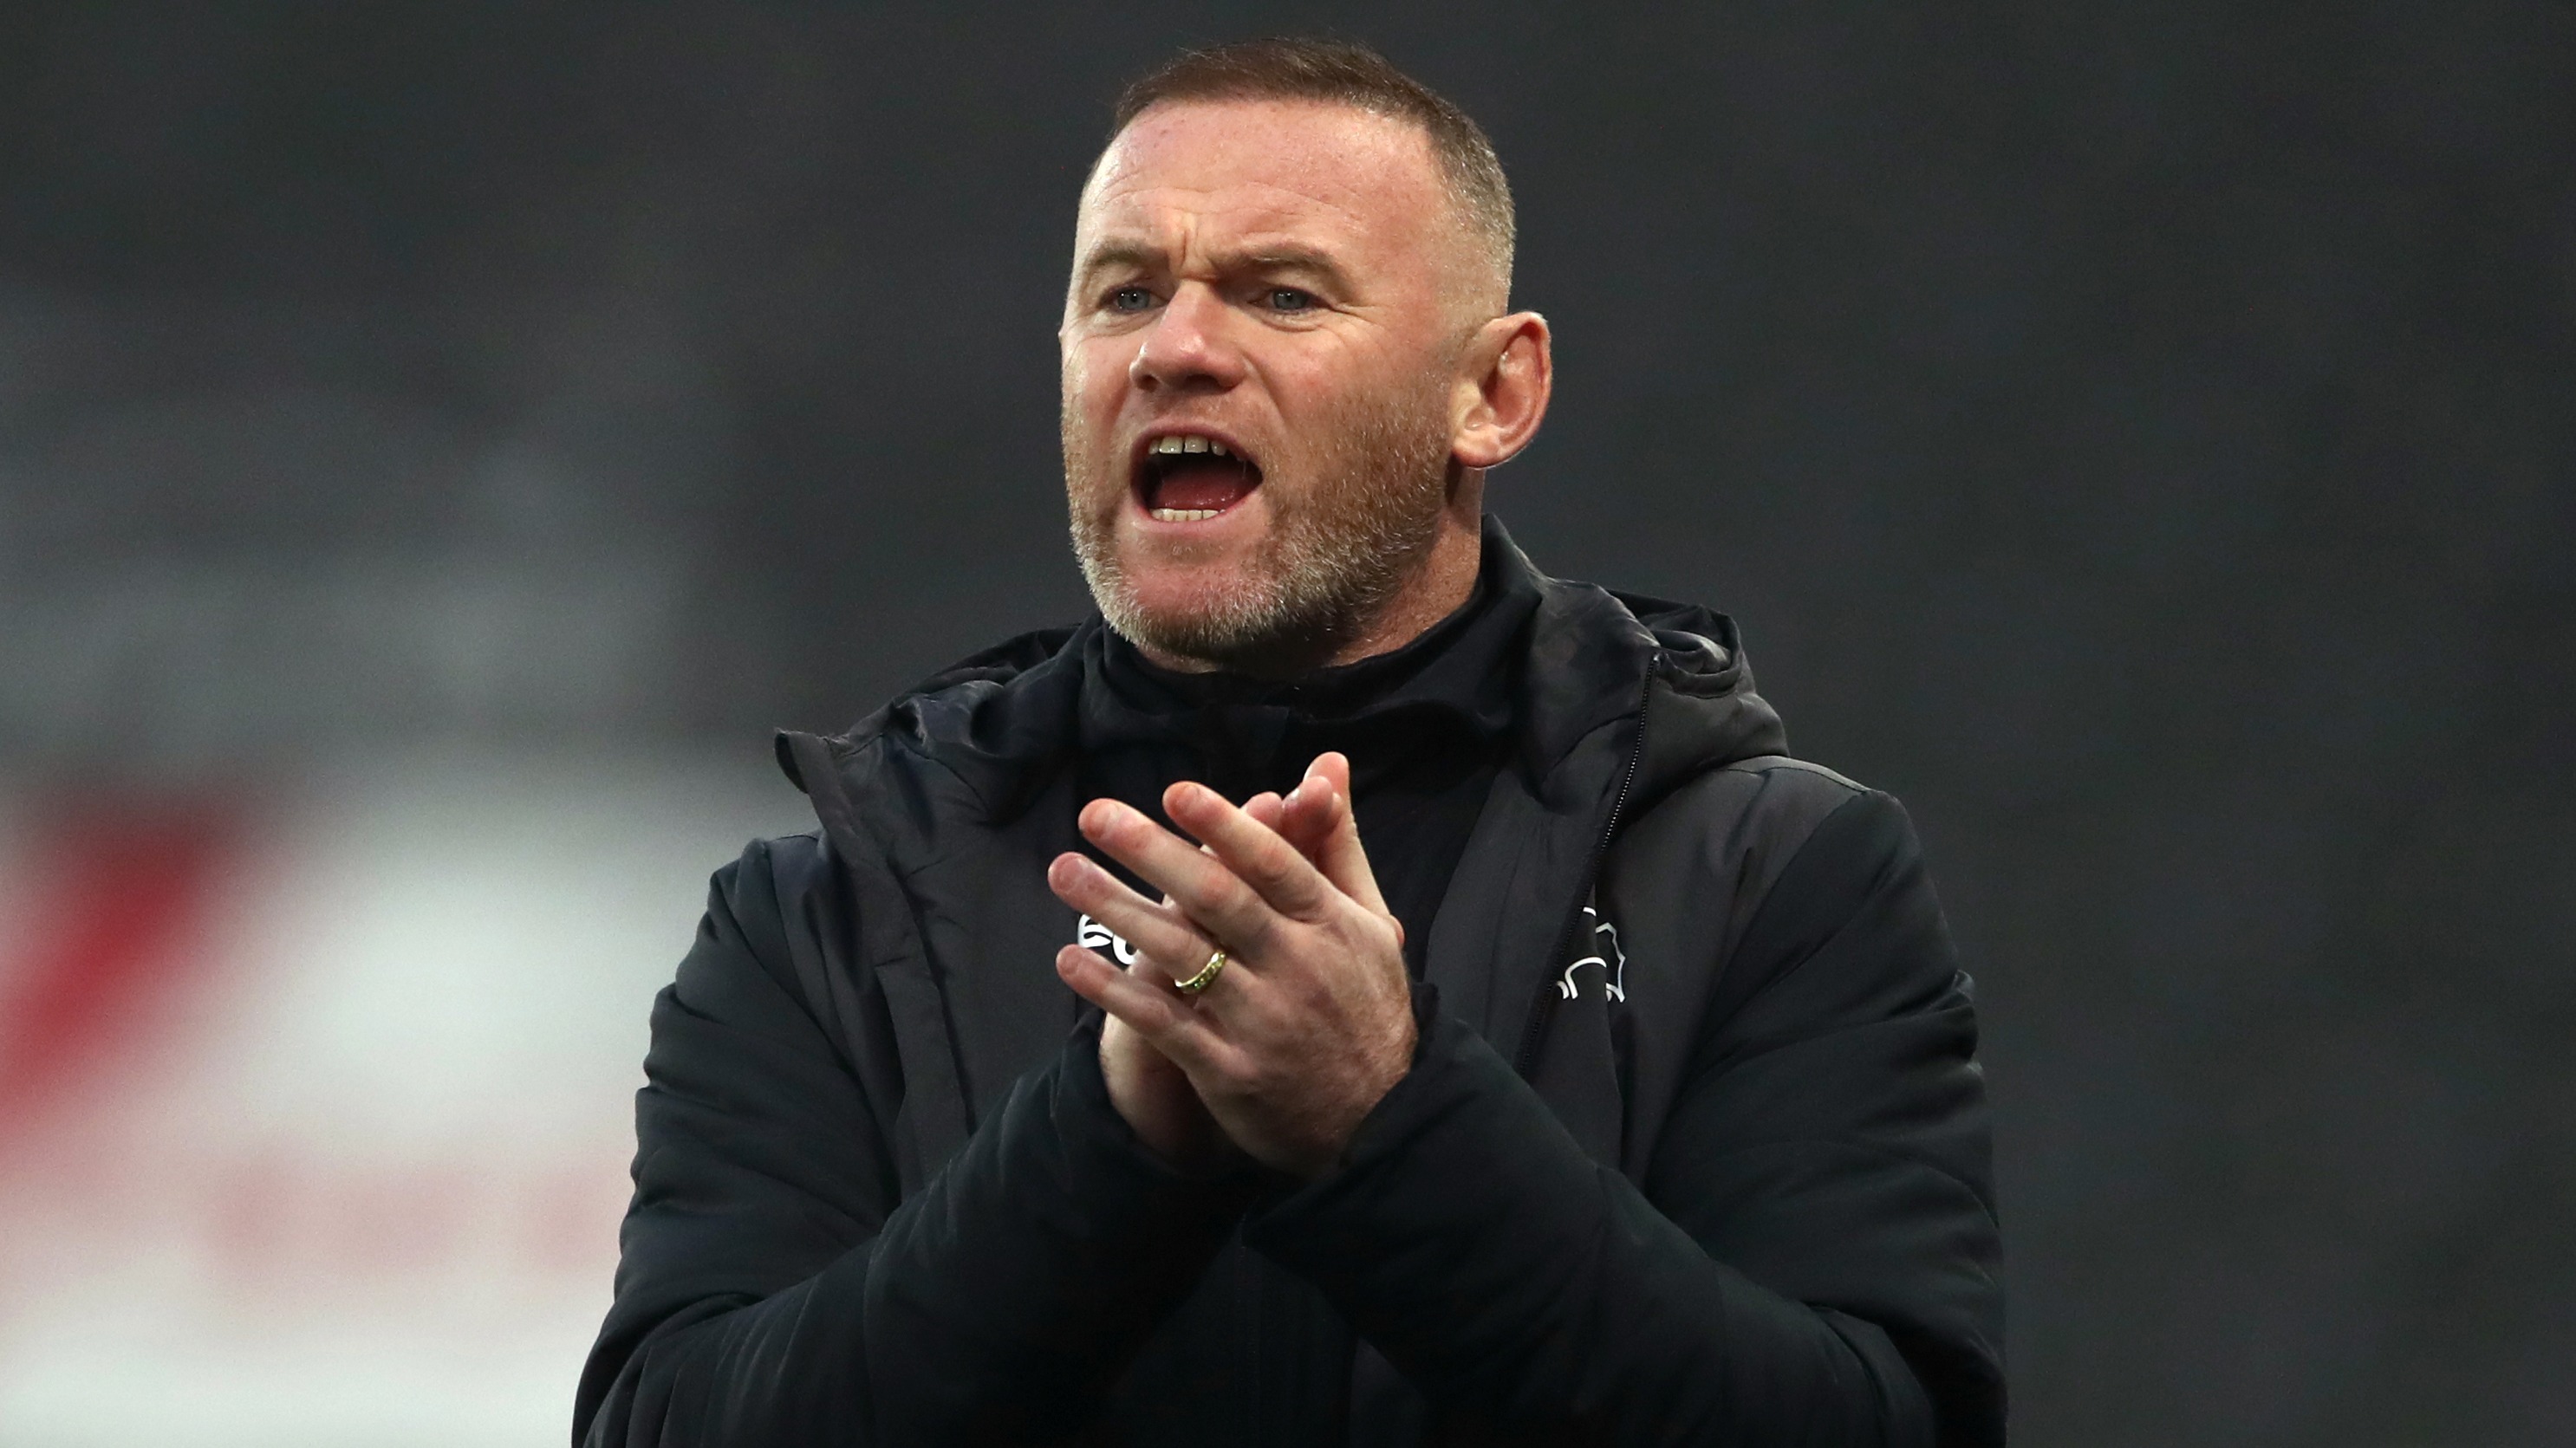 Wayne Rooney Appointed New Manager Of Derby County Fc Central Itv News